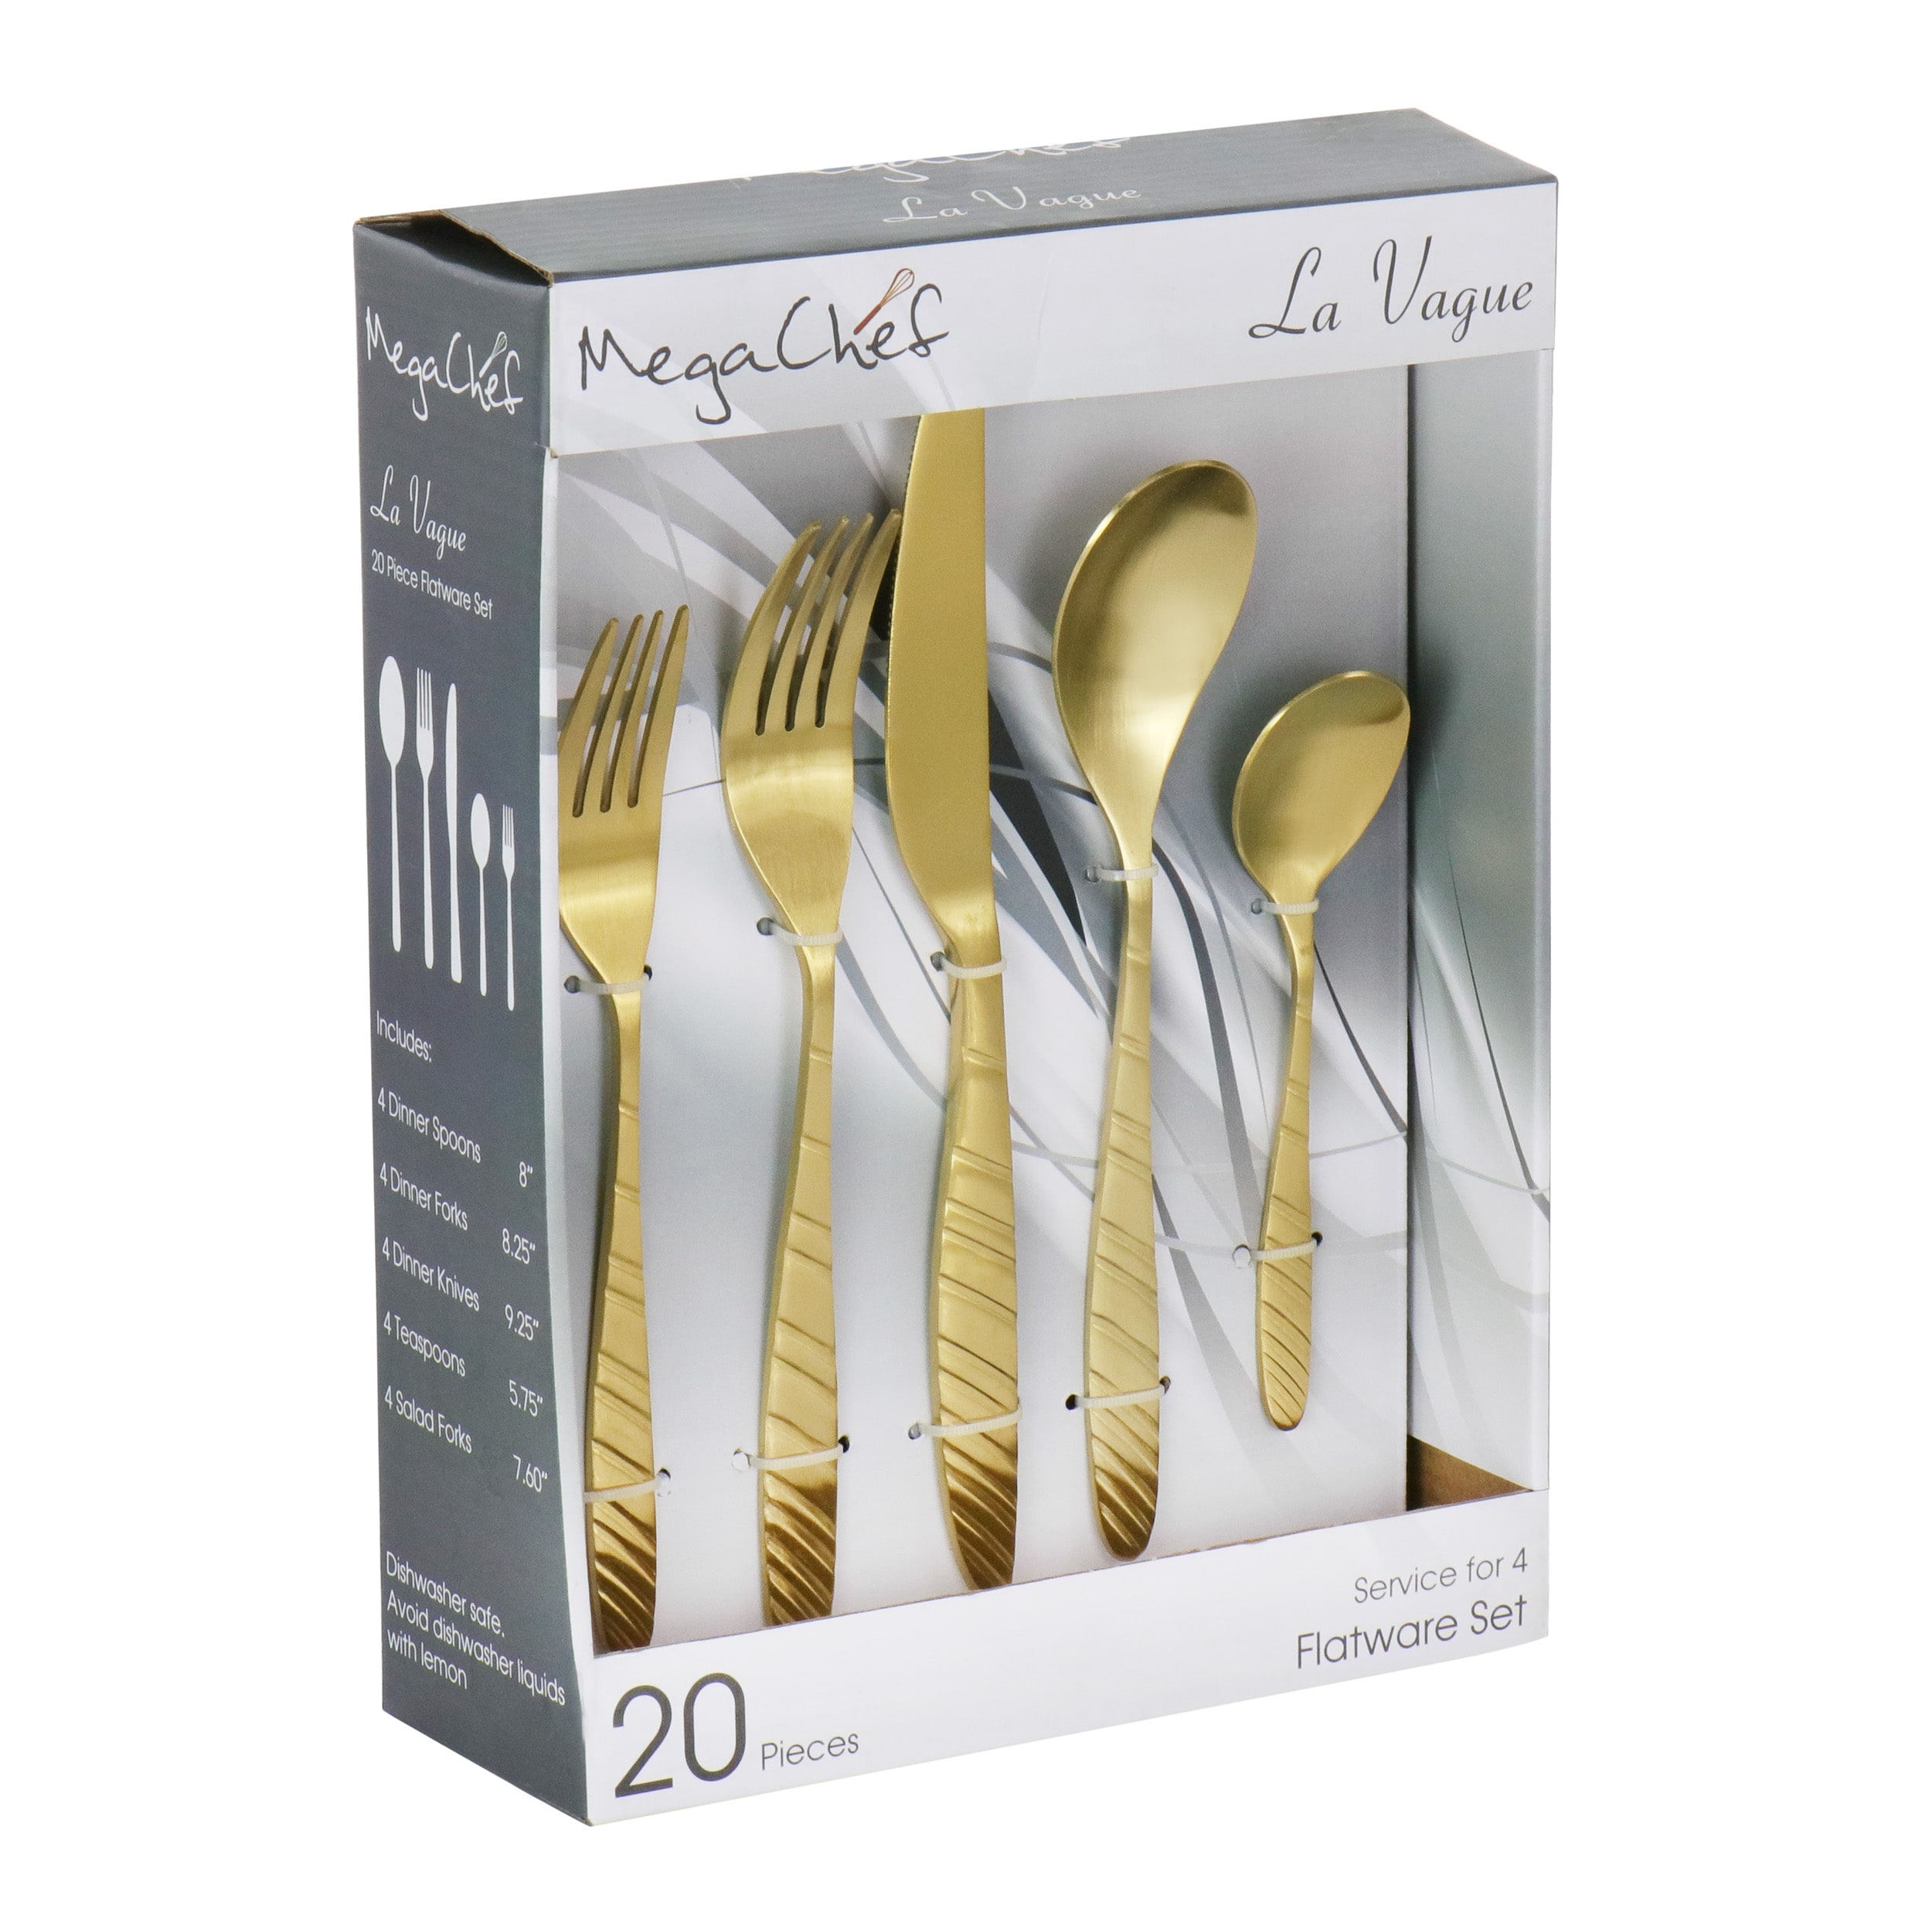 https://ak1.ostkcdn.com/images/products/is/images/direct/bed496a1d9e6936147a4f068b03b707b1a5b08ee/Megachef-La-Vague-20pc-Flatware-Utensil-Set-Service-for-4-Matte-Gold.jpg